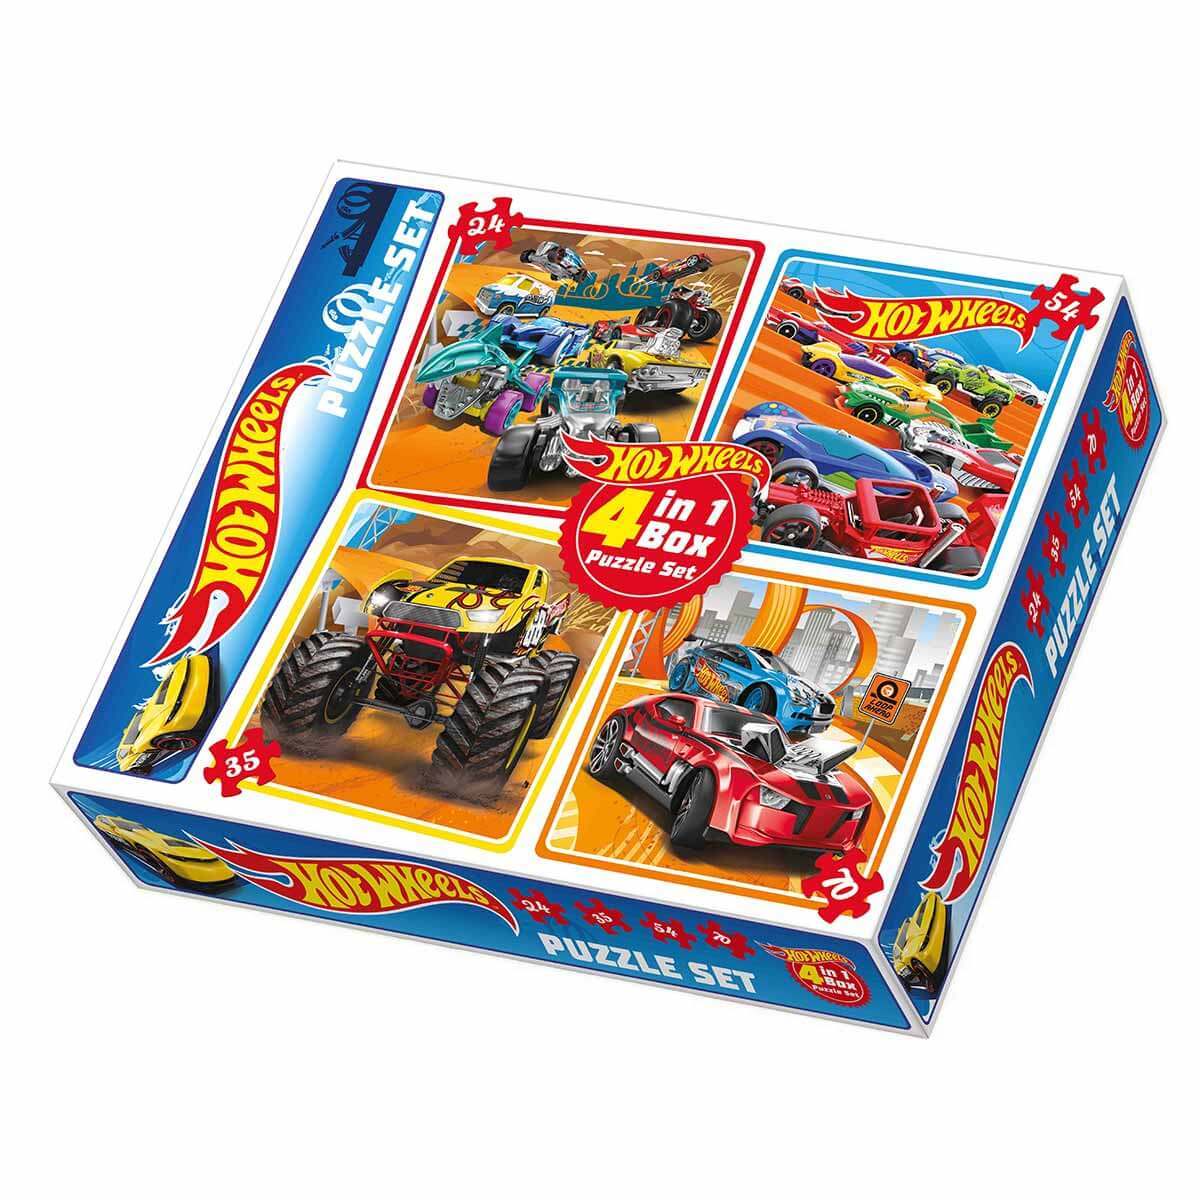 Diy-Toy Hot Wheels 4in1 Box Puzzle